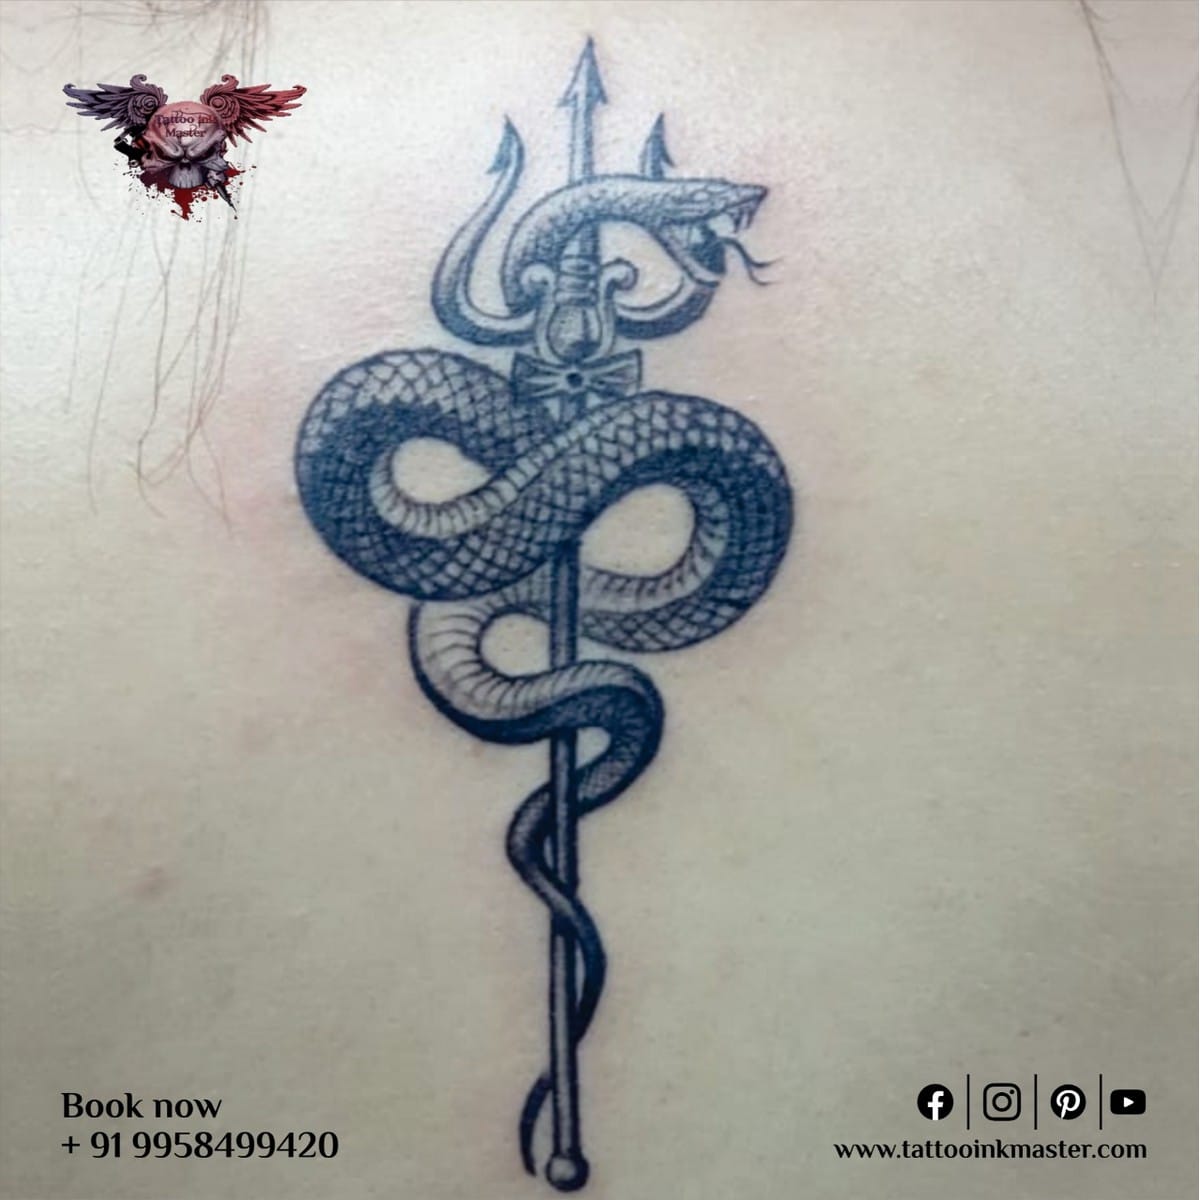 You are currently viewing Iconic Trishul and Snak Tattoo for Hand